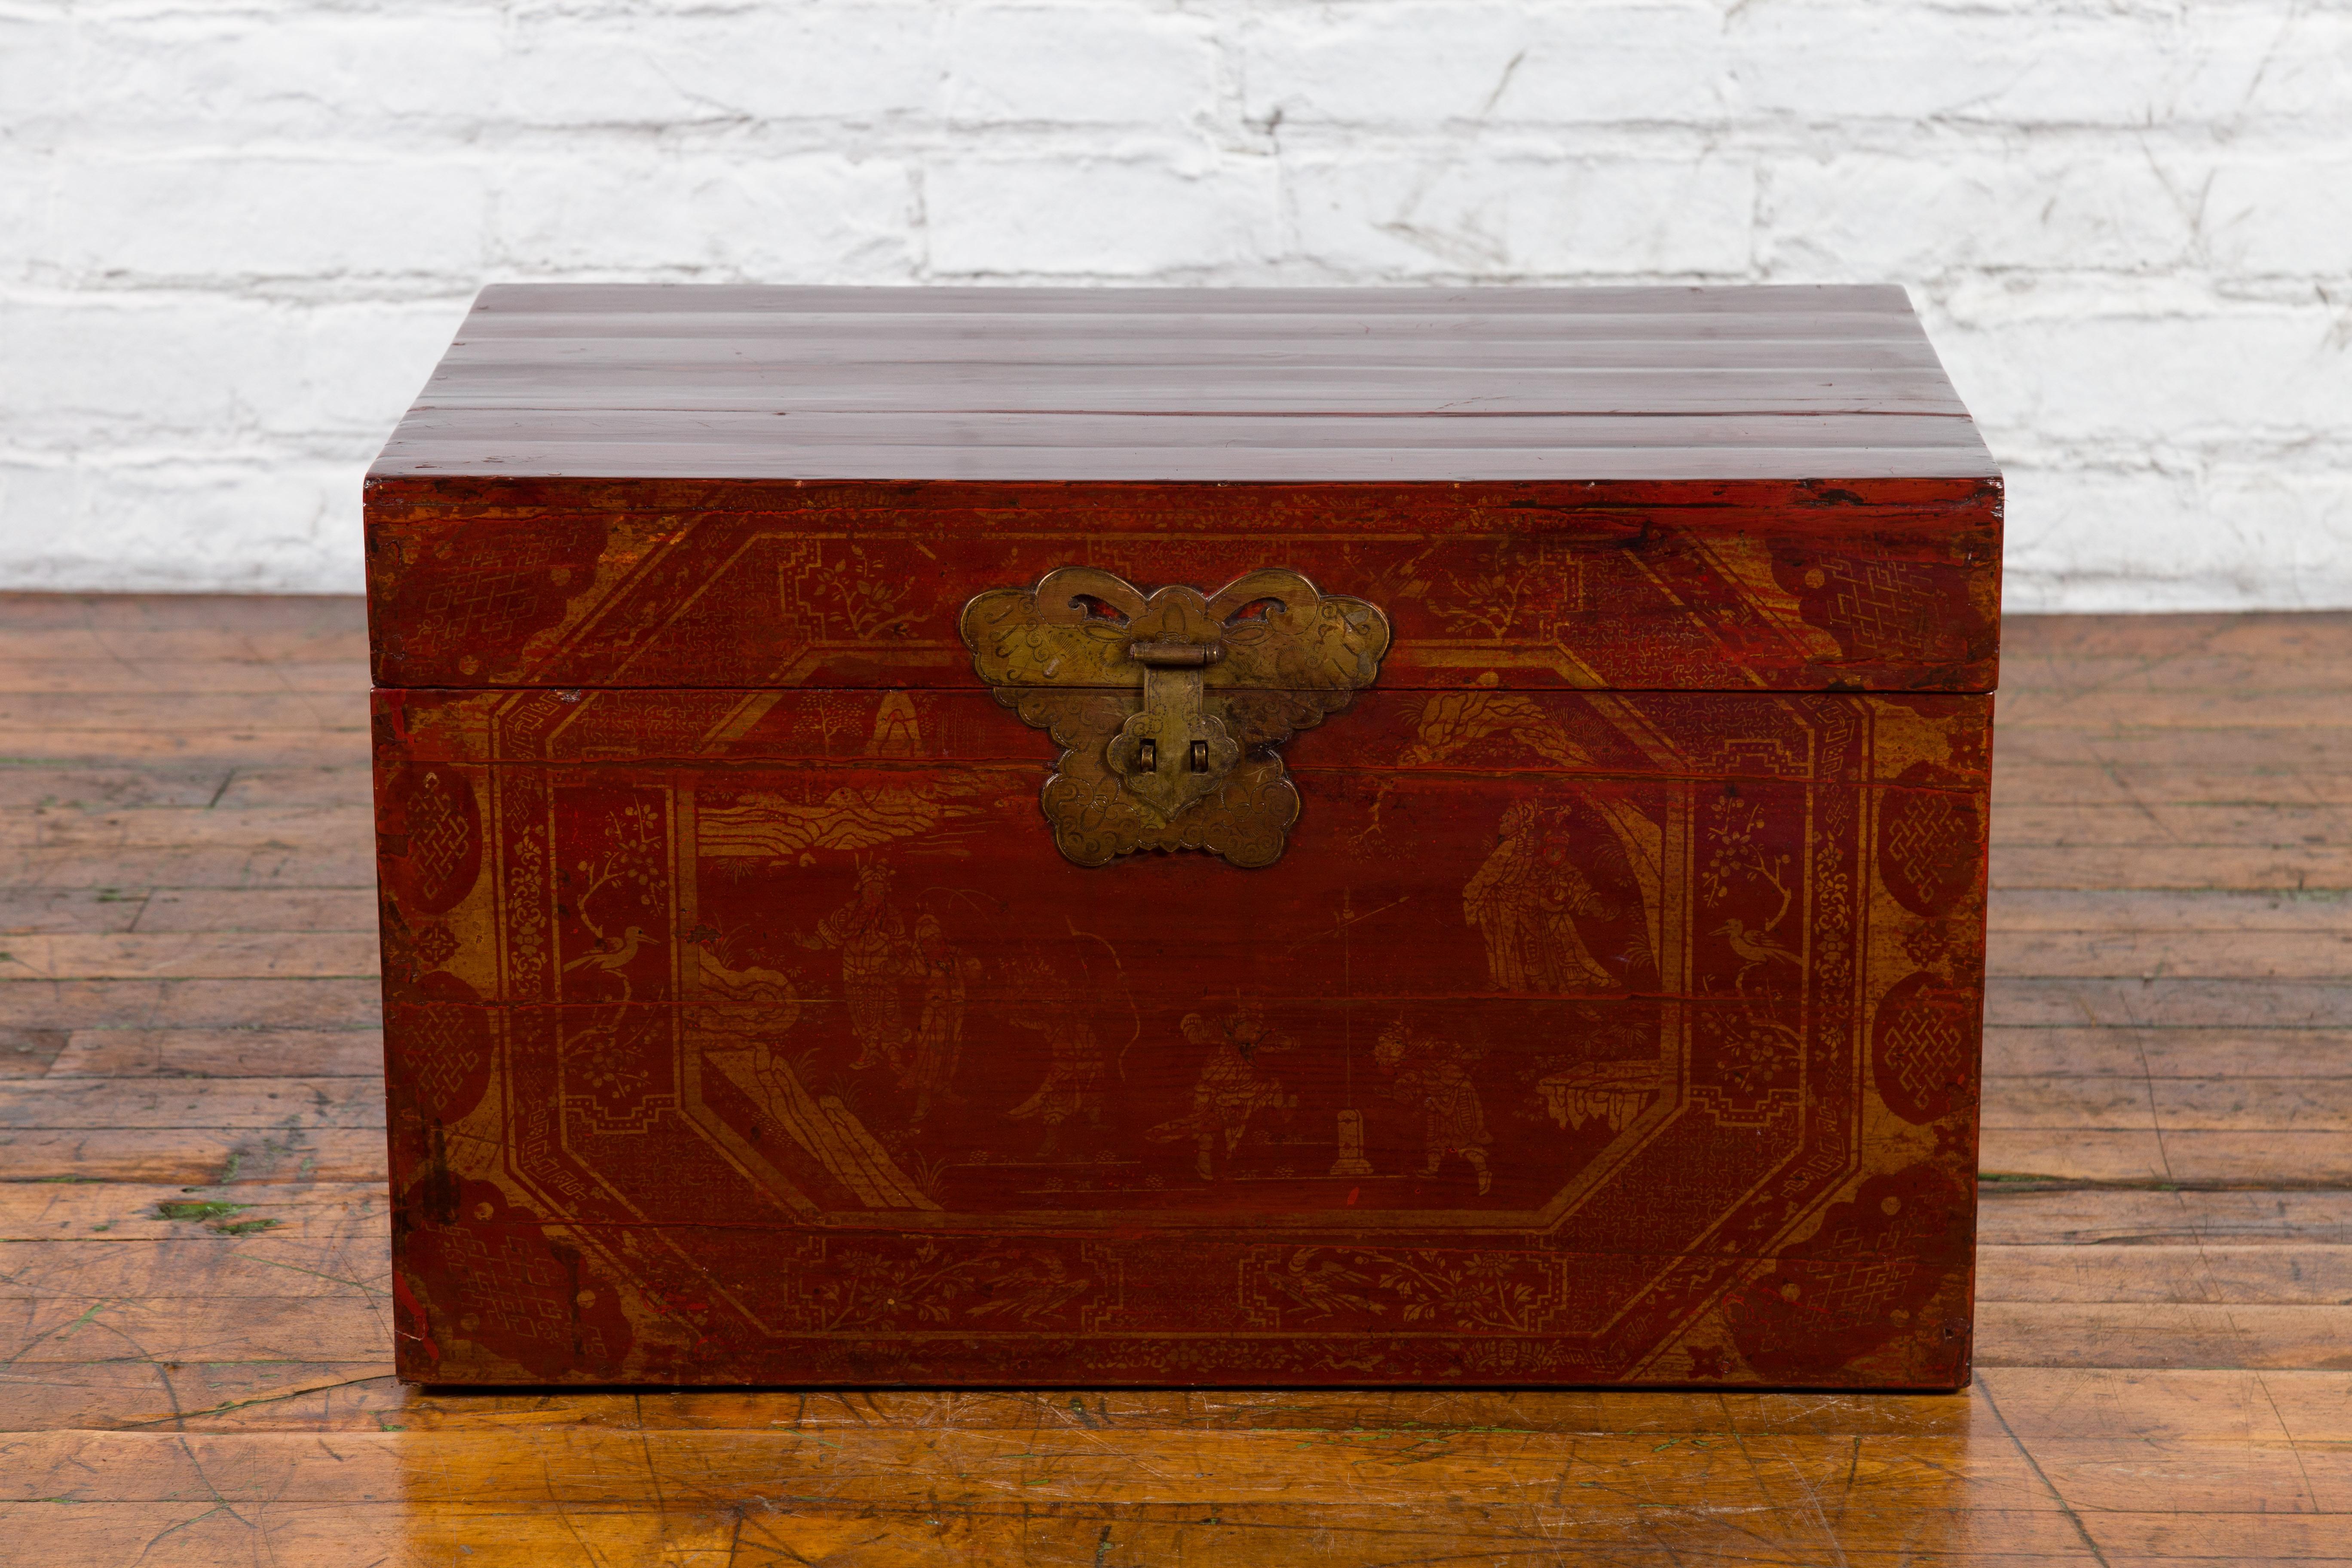 An antique Chinese red lacquered trunk from the early 20th century, with court scenes, foliage and birds. Created in China during the early years of the 20th century, this red lacquered trunk features a rectangular lid opening thanks to a brass